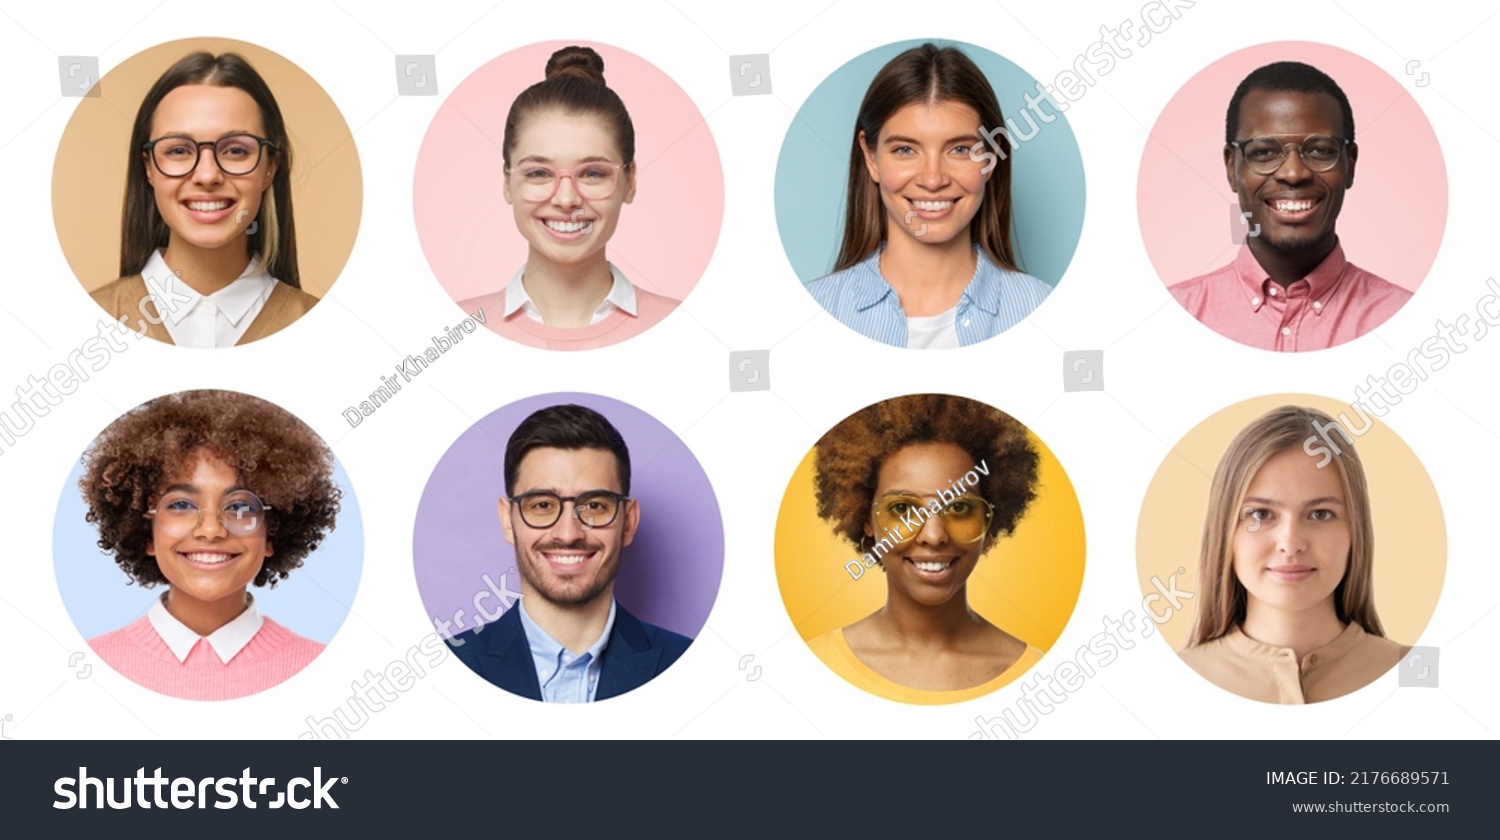 Collage of portraits and faces of multiracial group of various smiling young diverse people for profile picture #2176689571